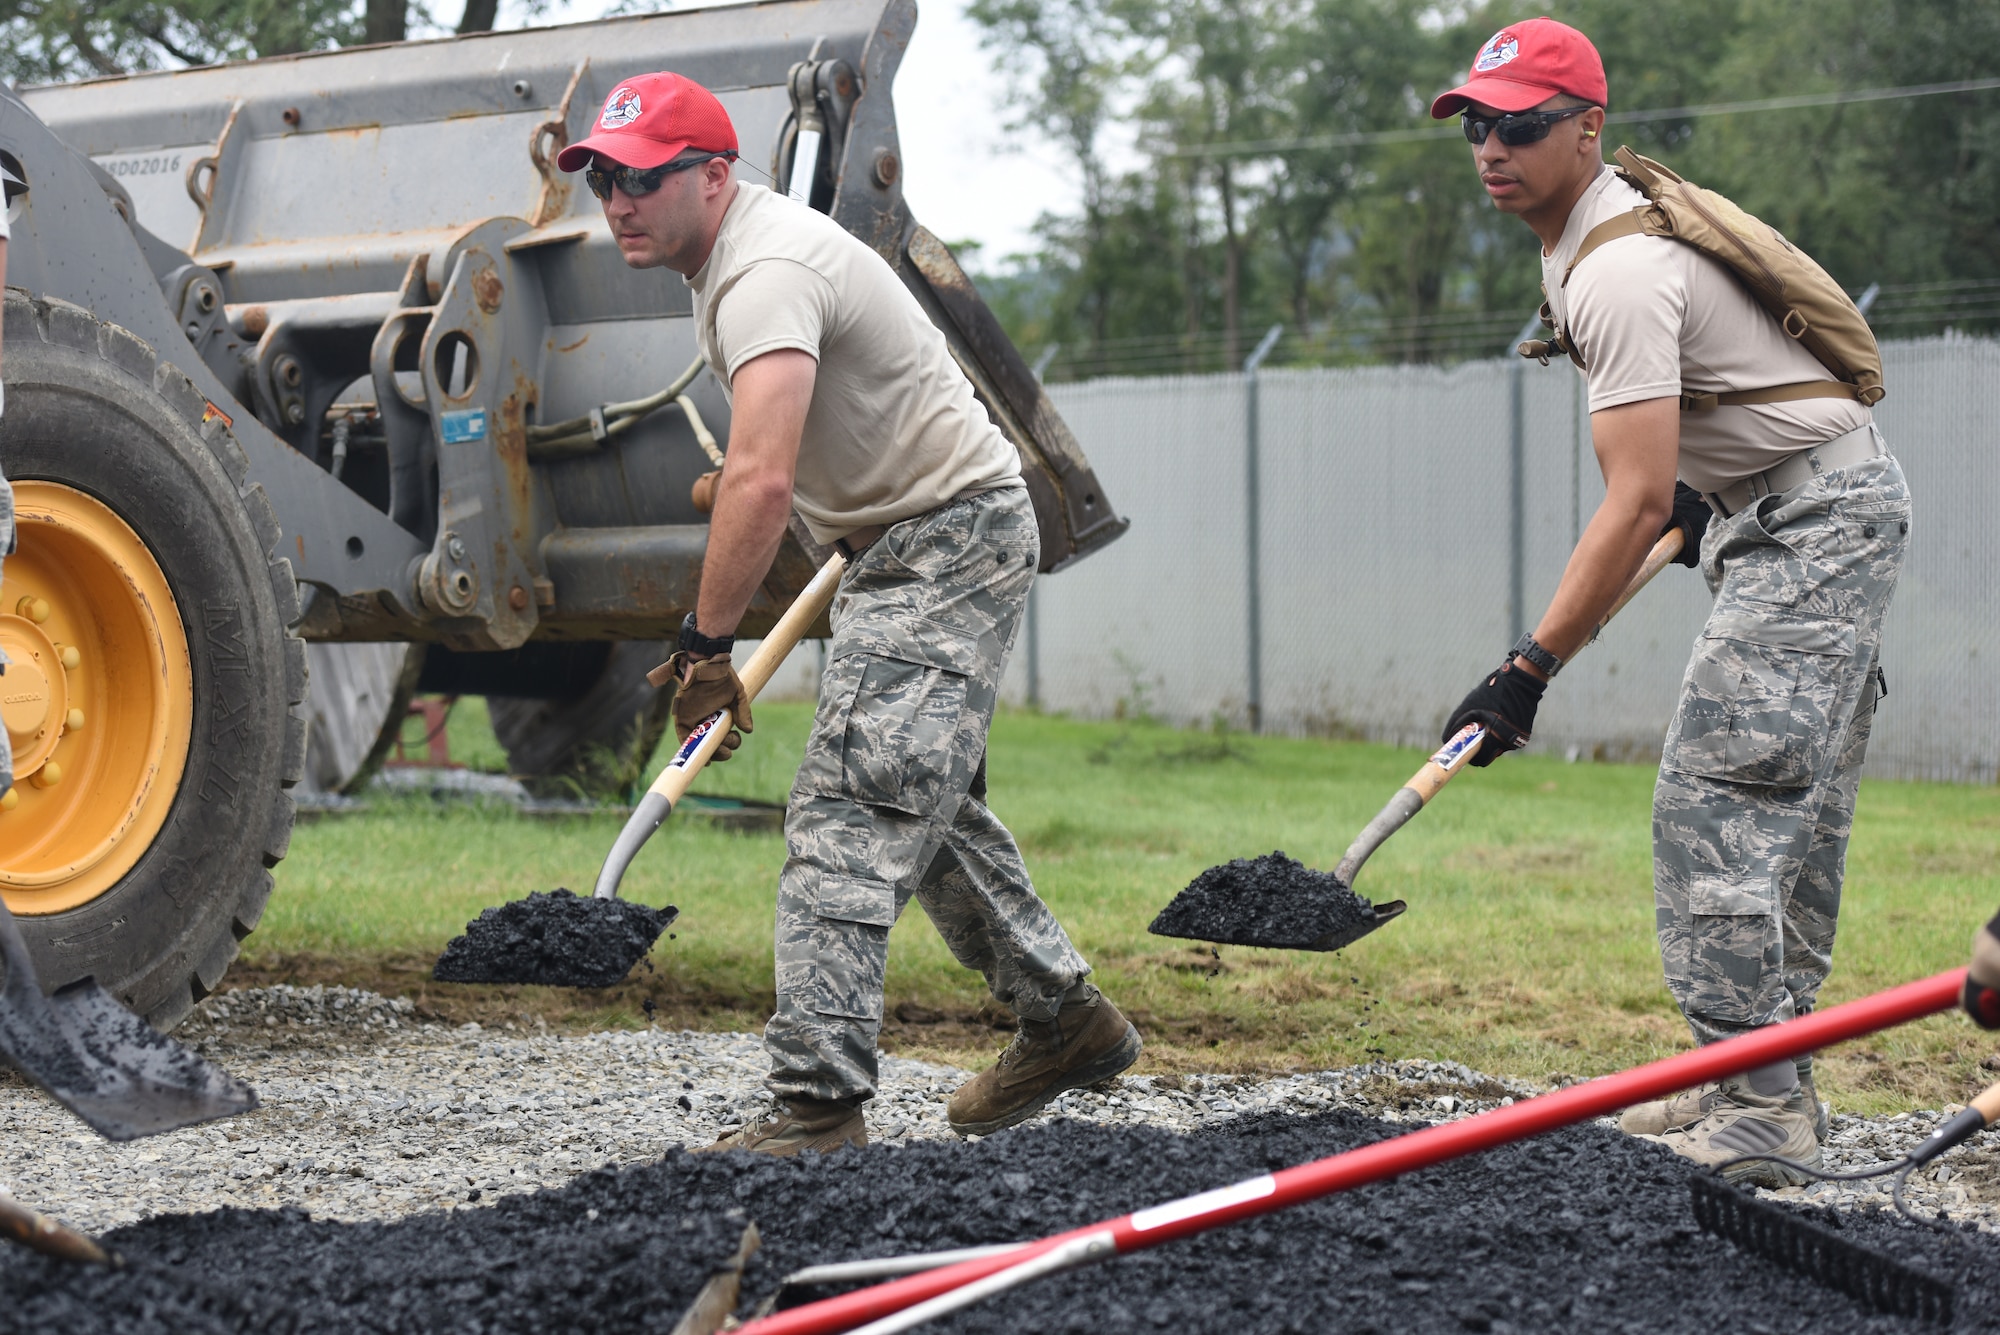 Airmen with the 201st RED HORSE Squadron, Fort Indiantown Gap, Pennsylvania, spread asphalt in preparation for paving a small section on base Sept. 7, 2018. The second day of the field training exercise was focused on specific career field training for eight different Air Force Specialty Codes. (U.S. Air National Guard photo by Senior Airman Julia Sorber/Released)